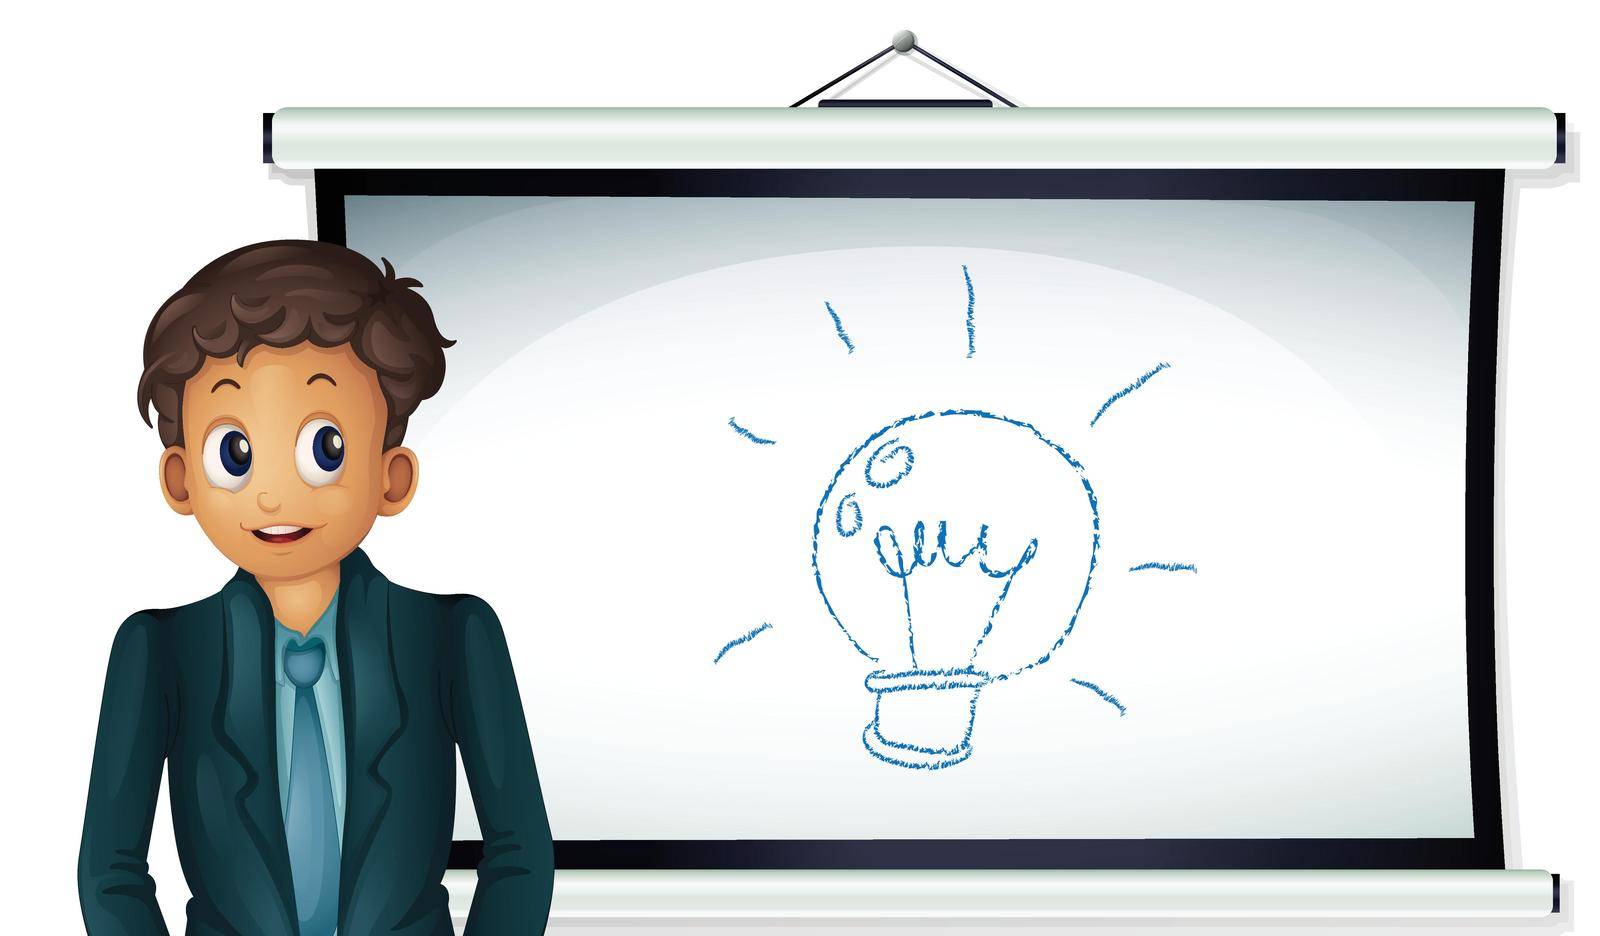 Illustration of a business man presenting an idea